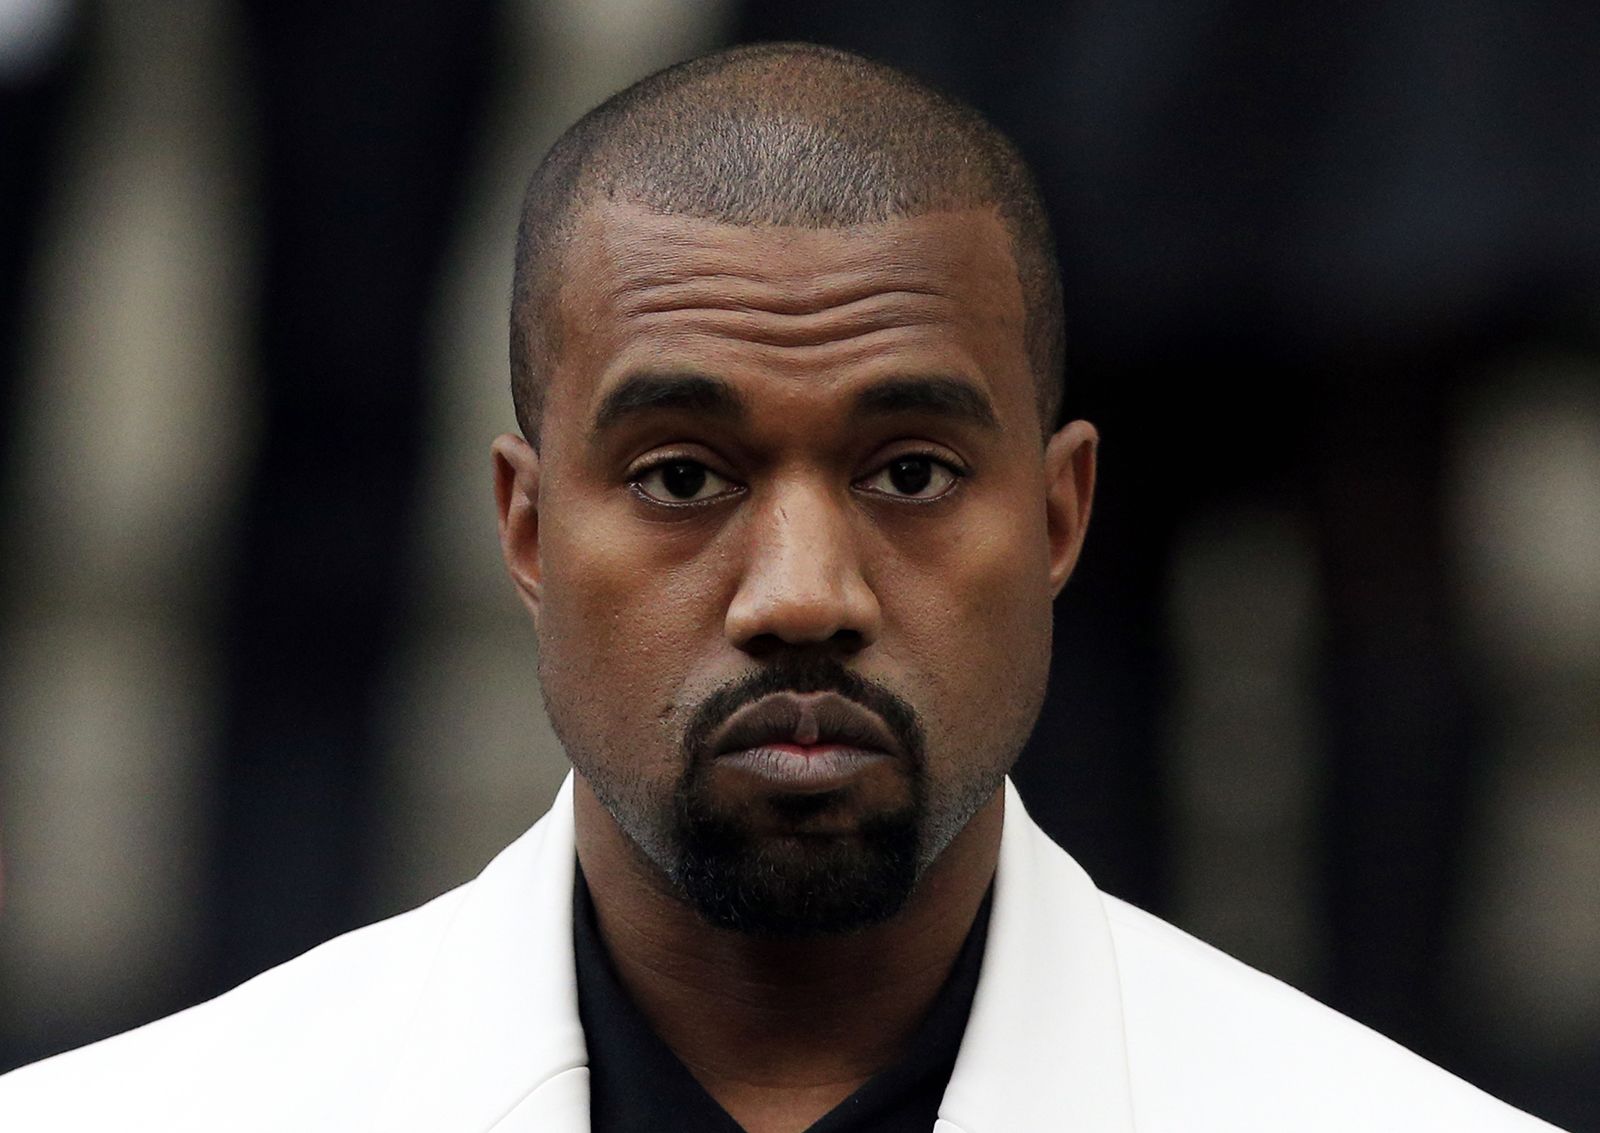 Kanye West's Twitter account has been suspended after Elon Musk